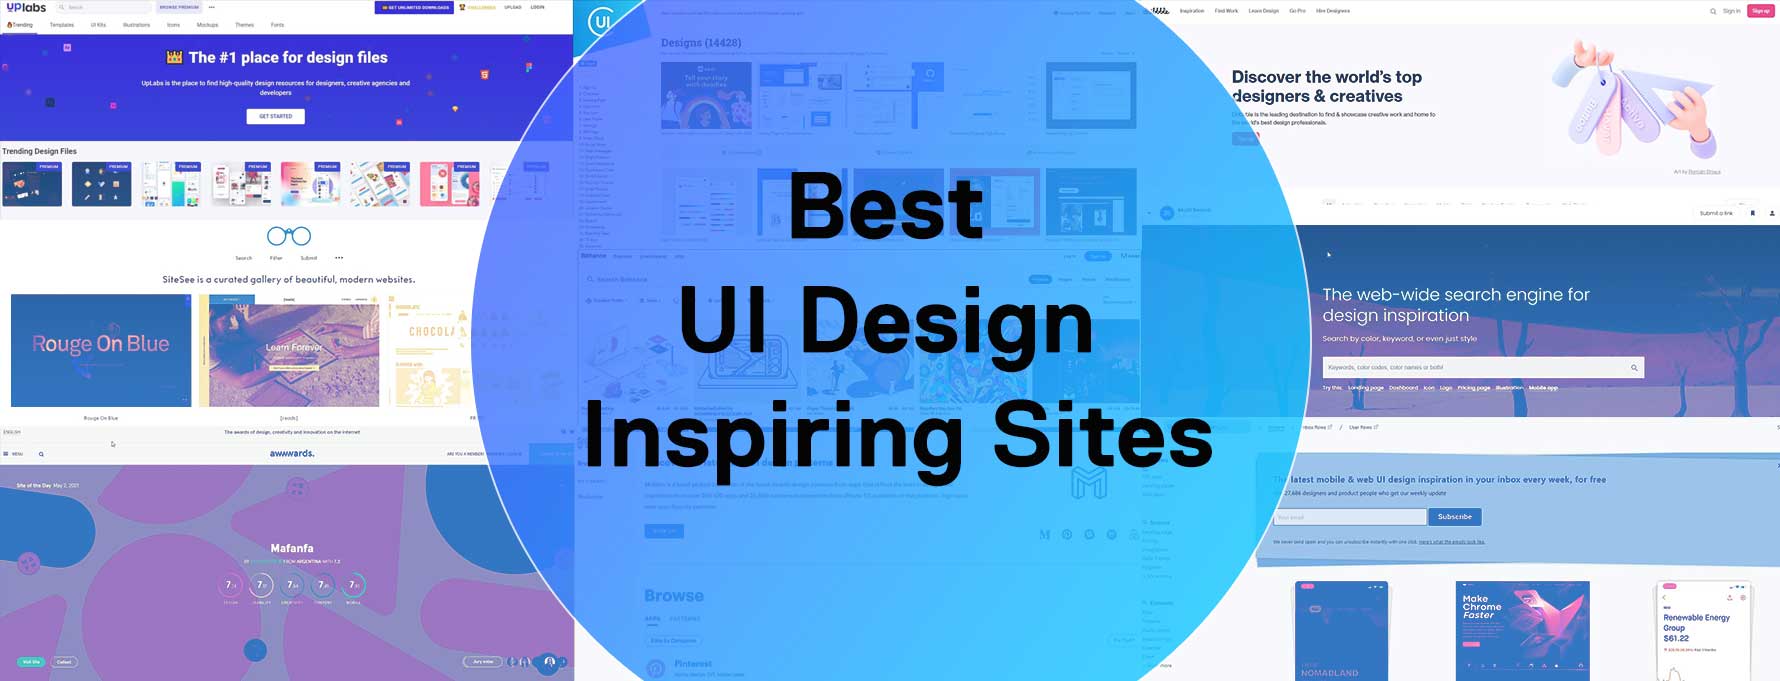 You are currently viewing Best UI Design Inspiring Sites | Enhance your Exciting UI design idea with this 11 sites.